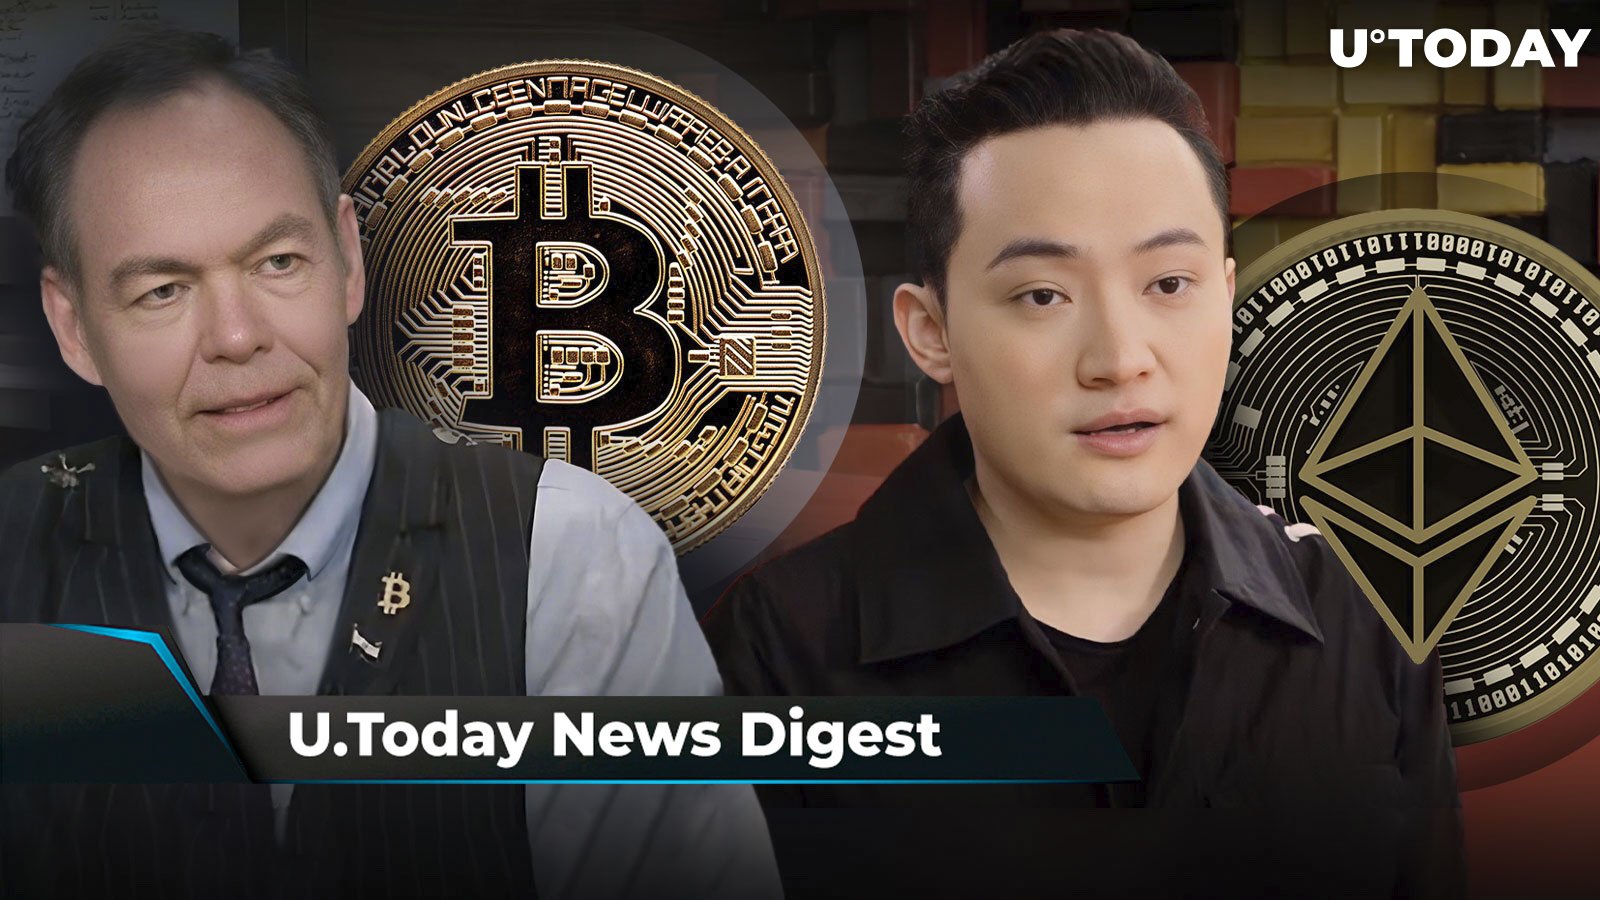 Max Keiser Points to BTC Price Growth Estimate, Justin Sun Withdraws $13.8 Million ETH From Binance, Elon Musk's Post Sparks SHIB, XRP Armies' Curiosity: Crypto News Digest by U.Today